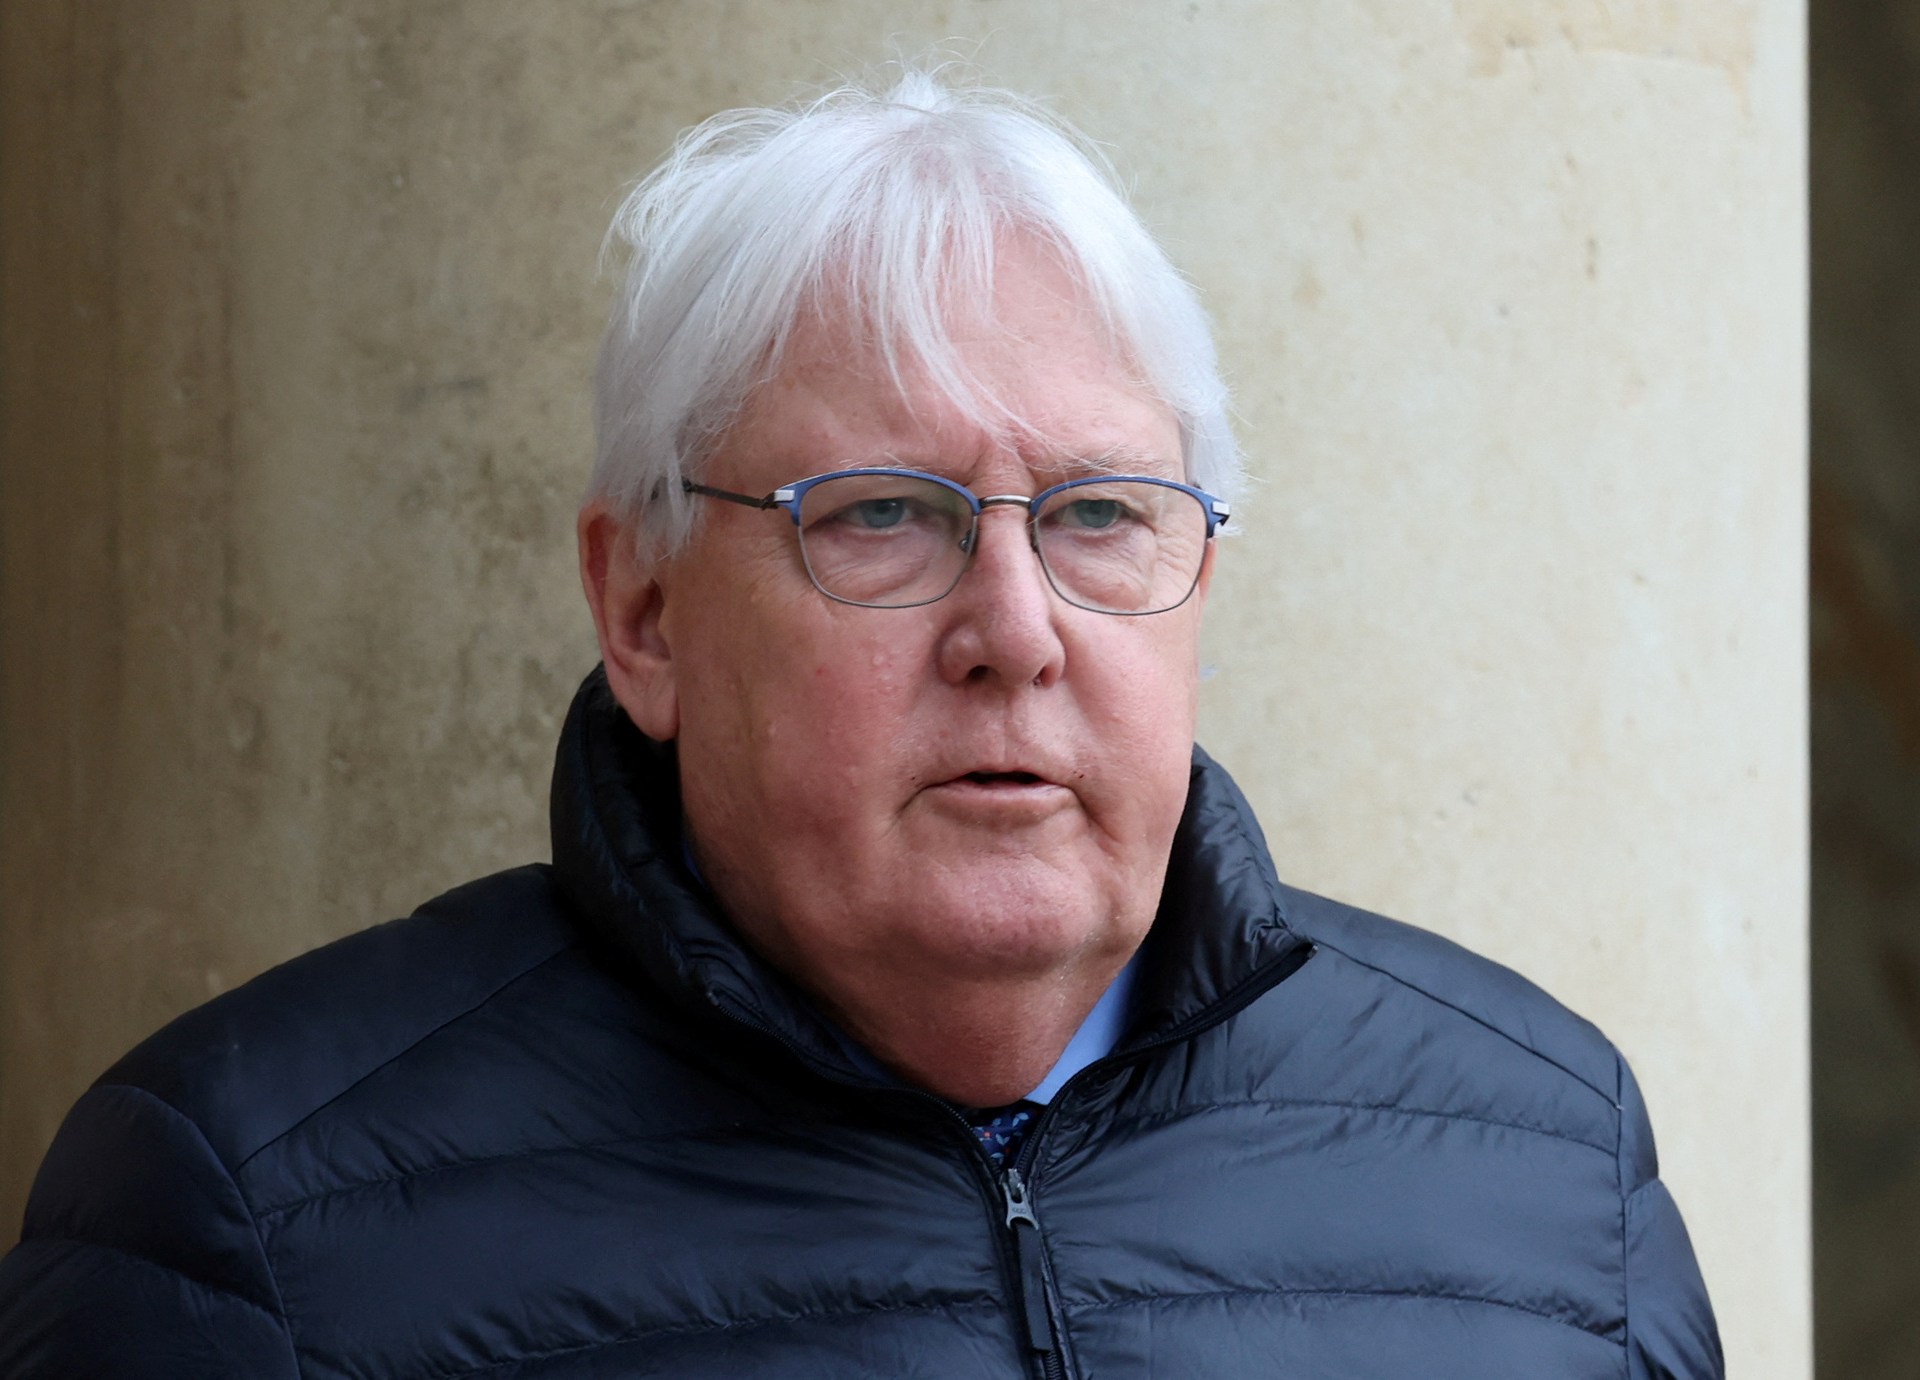 UN humanitarian chief Martin Griffiths to step down due to health reasons | United Nations News